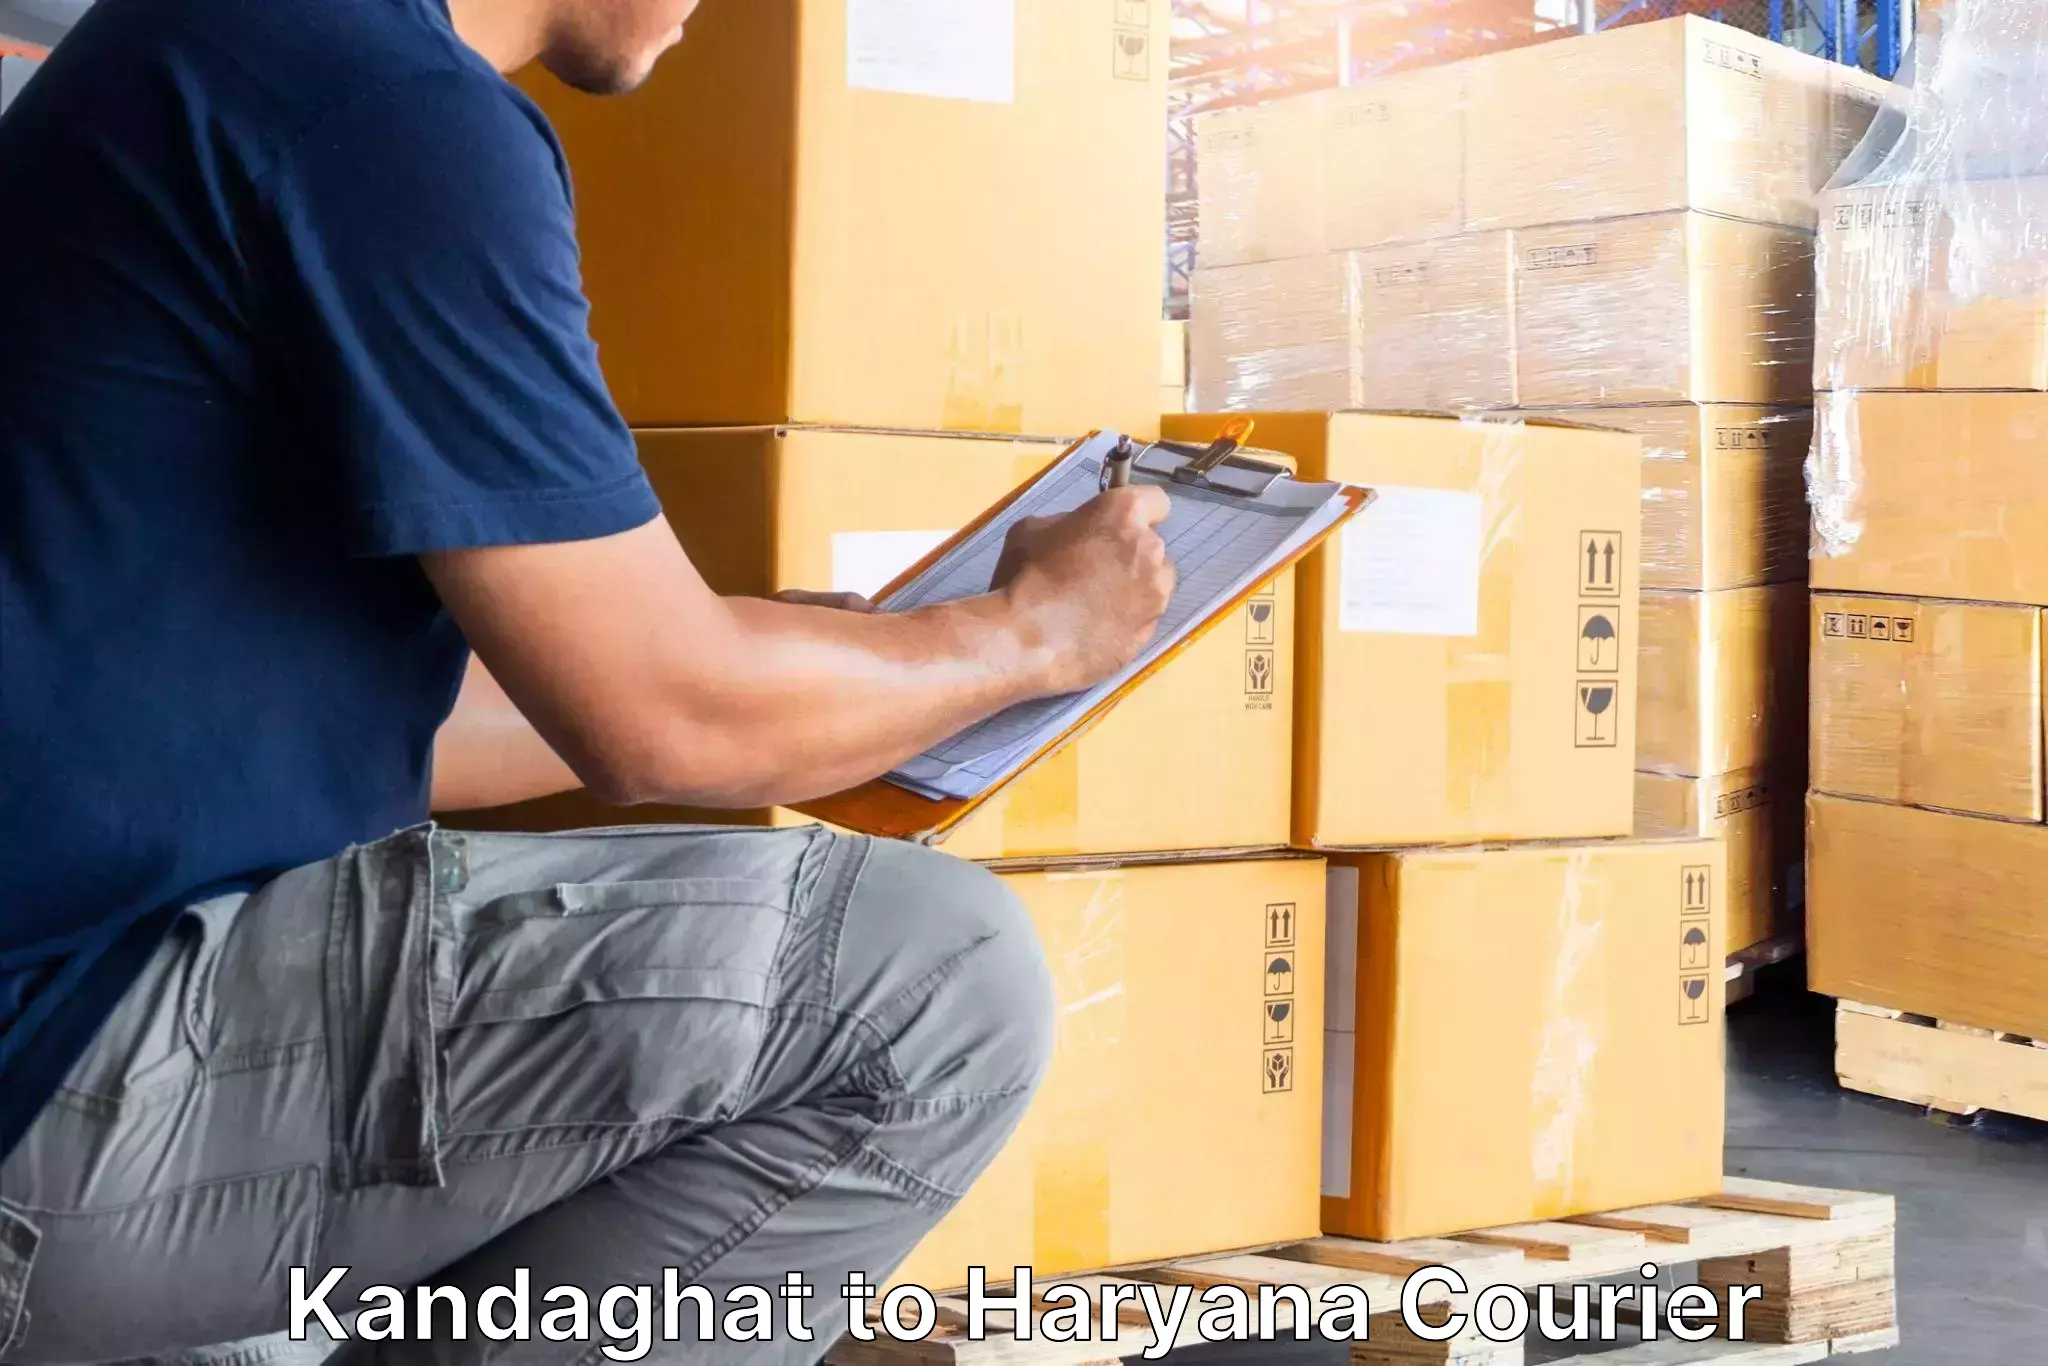 Professional furniture movers Kandaghat to NCR Haryana